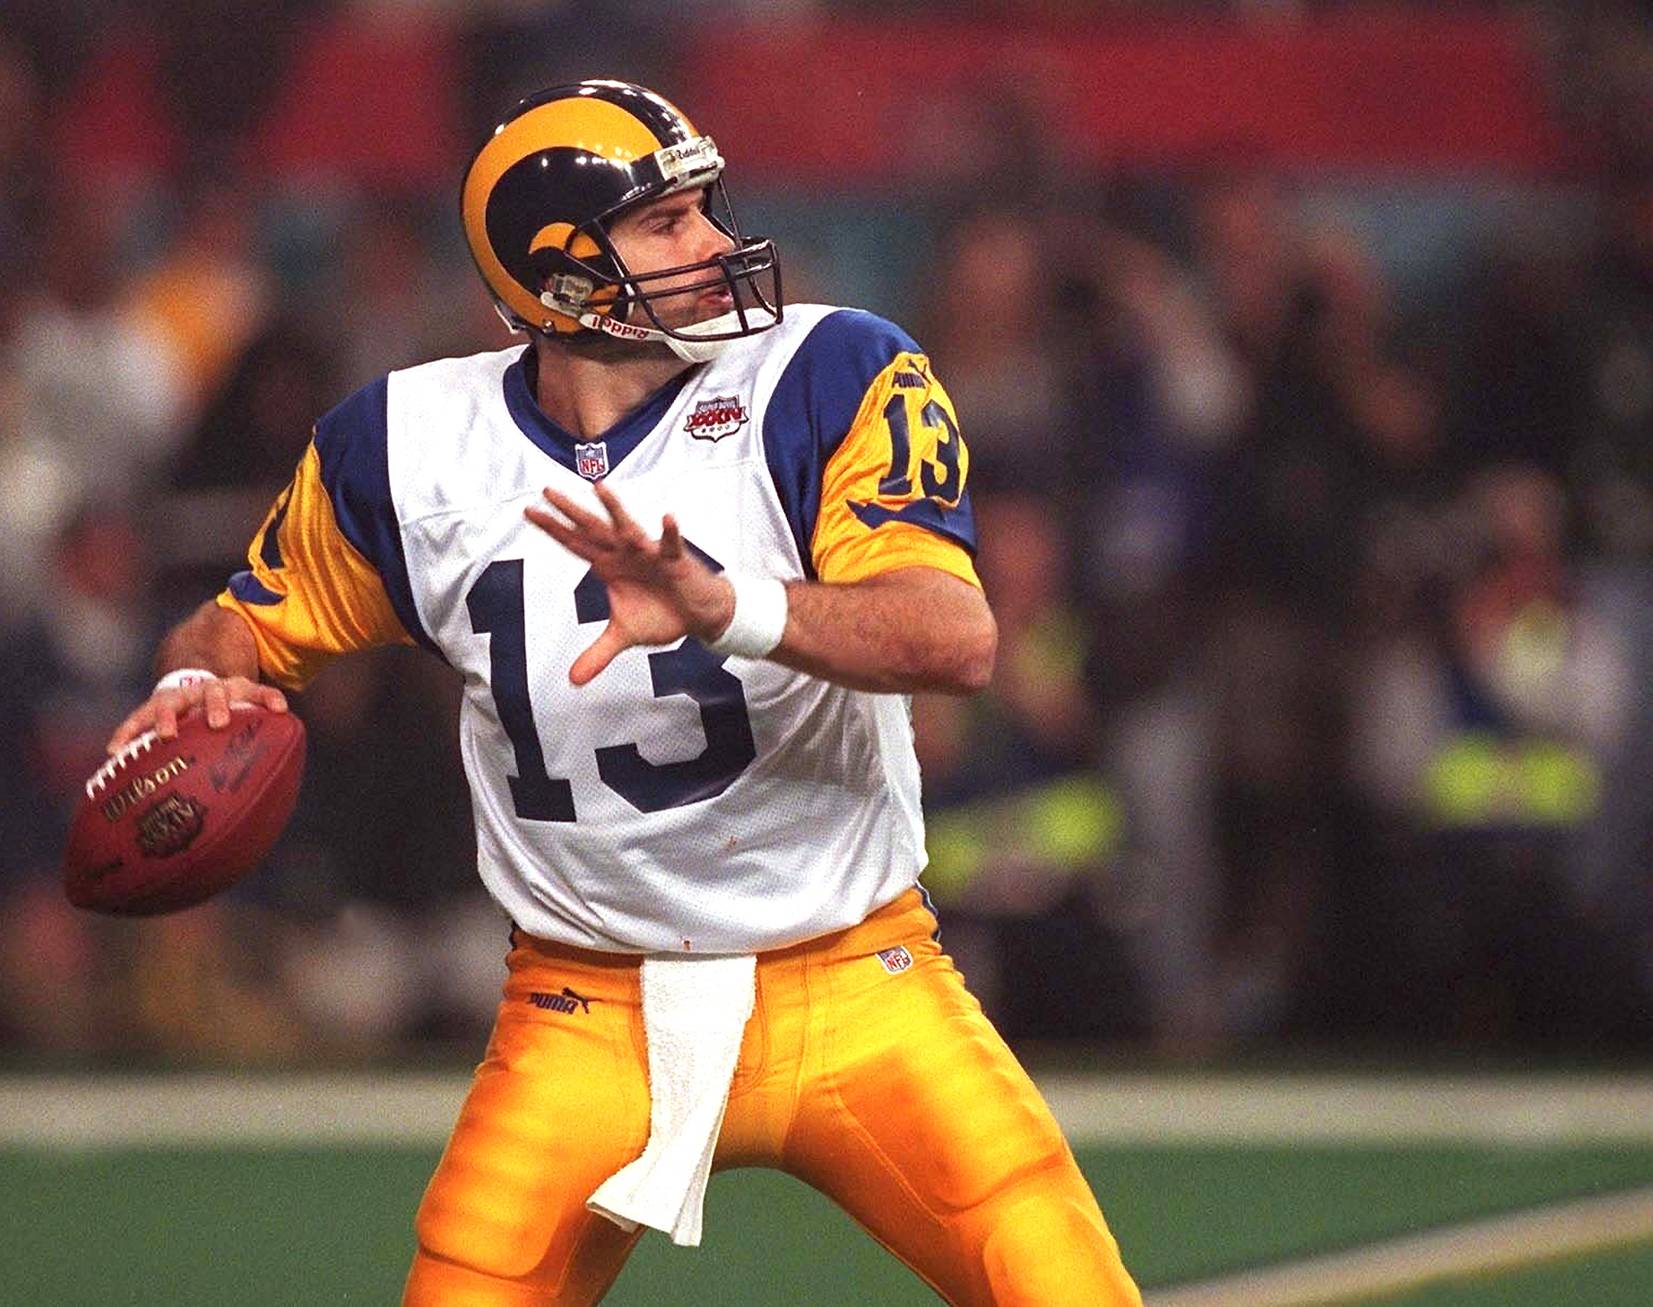 Quarterback Kurt Warner of the St. Louis Rams in action during a News  Photo - Getty Images